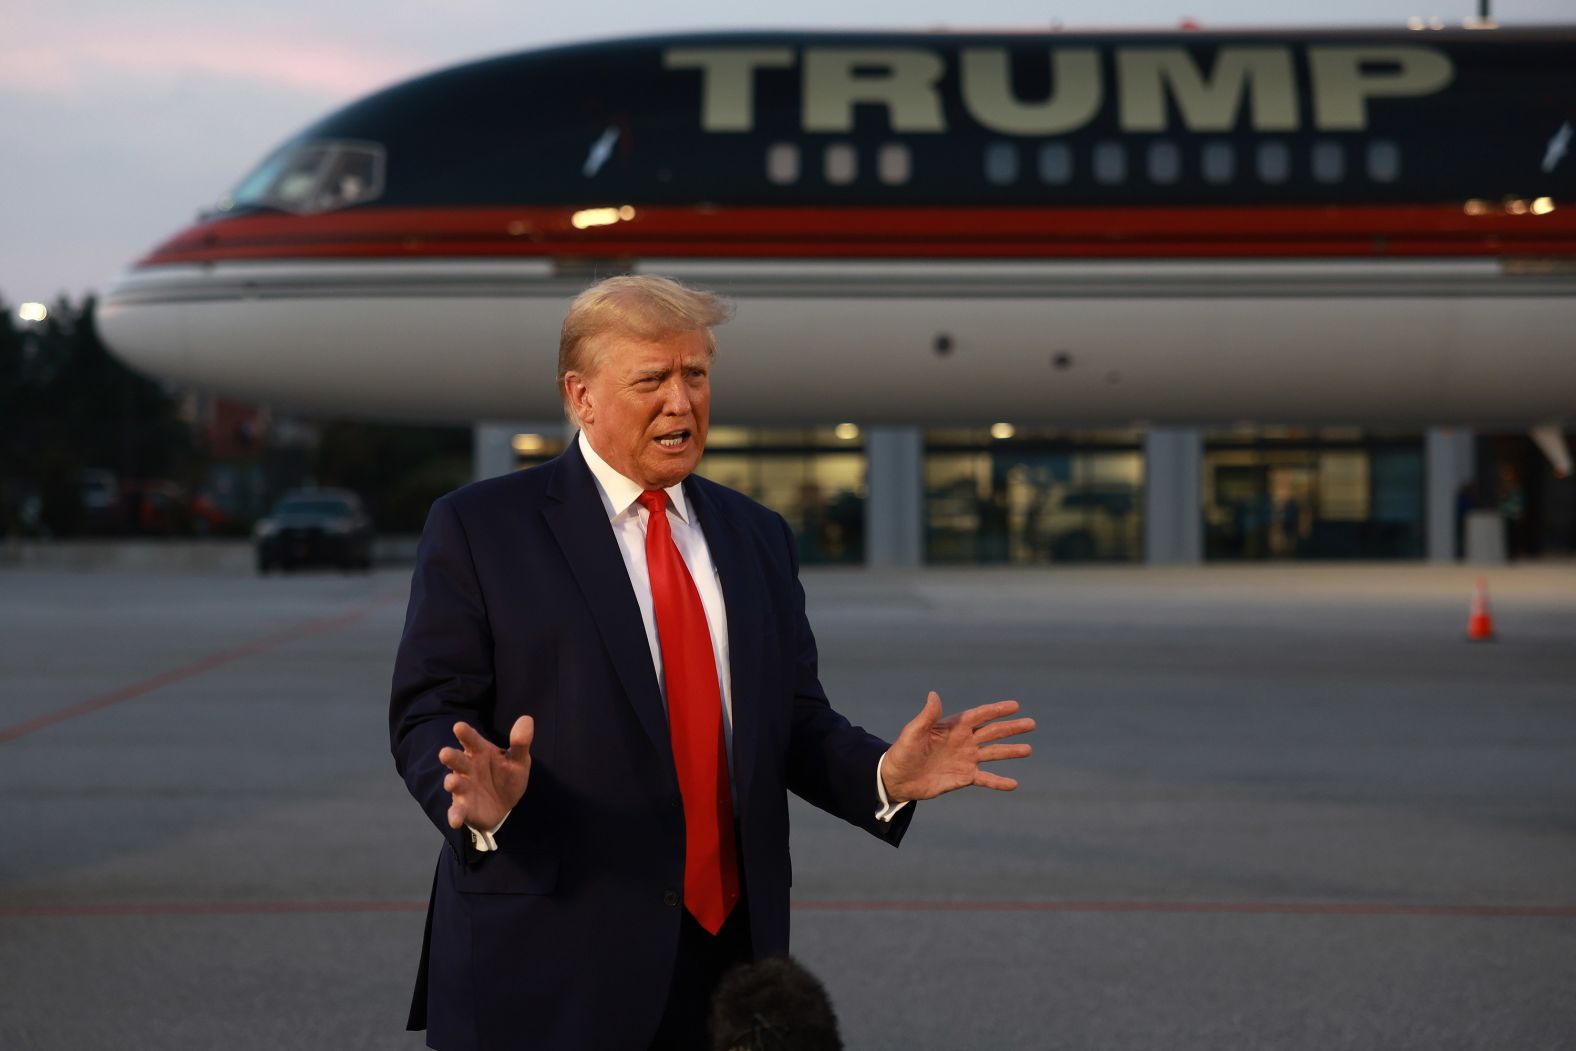 Trump speaks to the media at Hartsfield-Jackson Atlanta International Airport after surrendering at the Fulton County jail on Thursday. "I did nothing wrong," <a href="index.php?page=&url=https%3A%2F%2Fwww.cnn.com%2Fpolitics%2Flive-news%2Ftrump-georgia-surrender-indictment-08-24-23%2Fh_f0d3690dac70a28a64248287ac1b8a21" target="_blank">Trump told reporters</a> before boarding his plane.